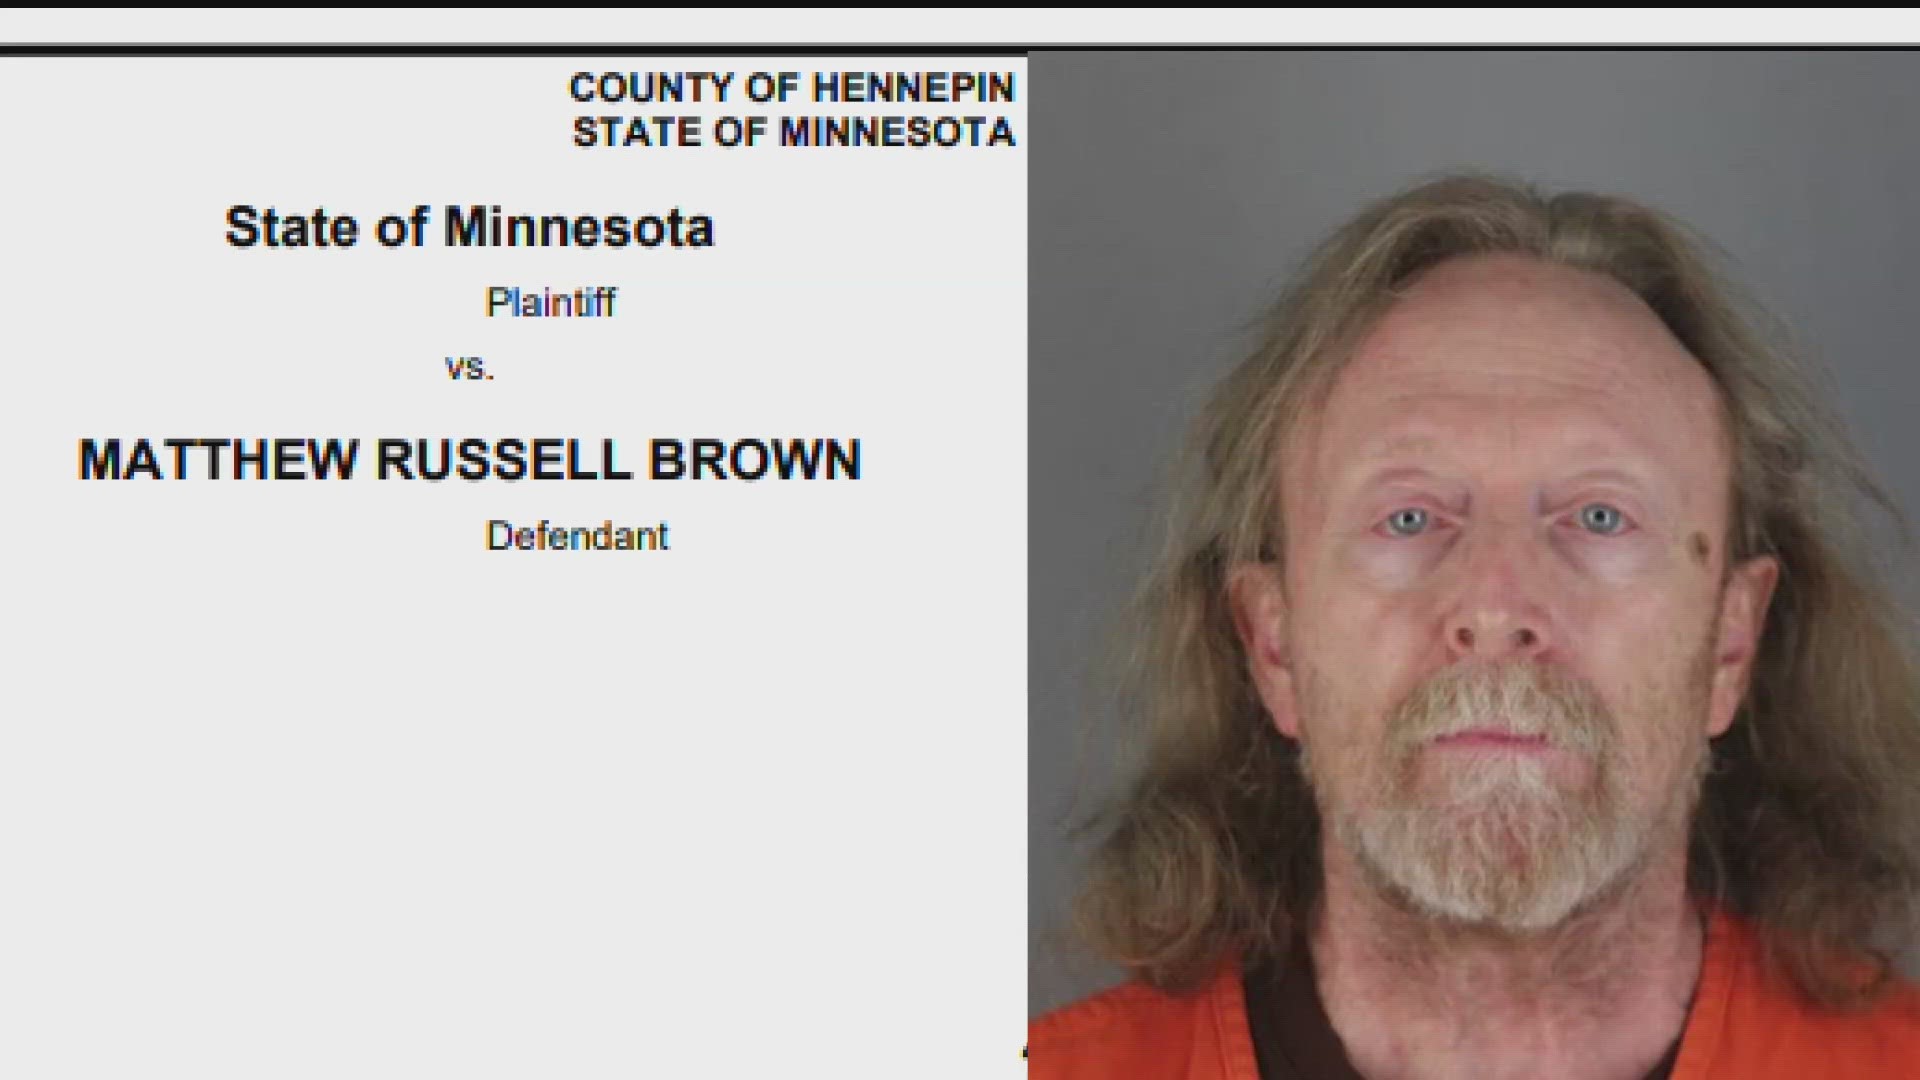 A former security councilor for the MN Sex Offender Program at Moose Lake was charged with murder for a 1984 knife attack.